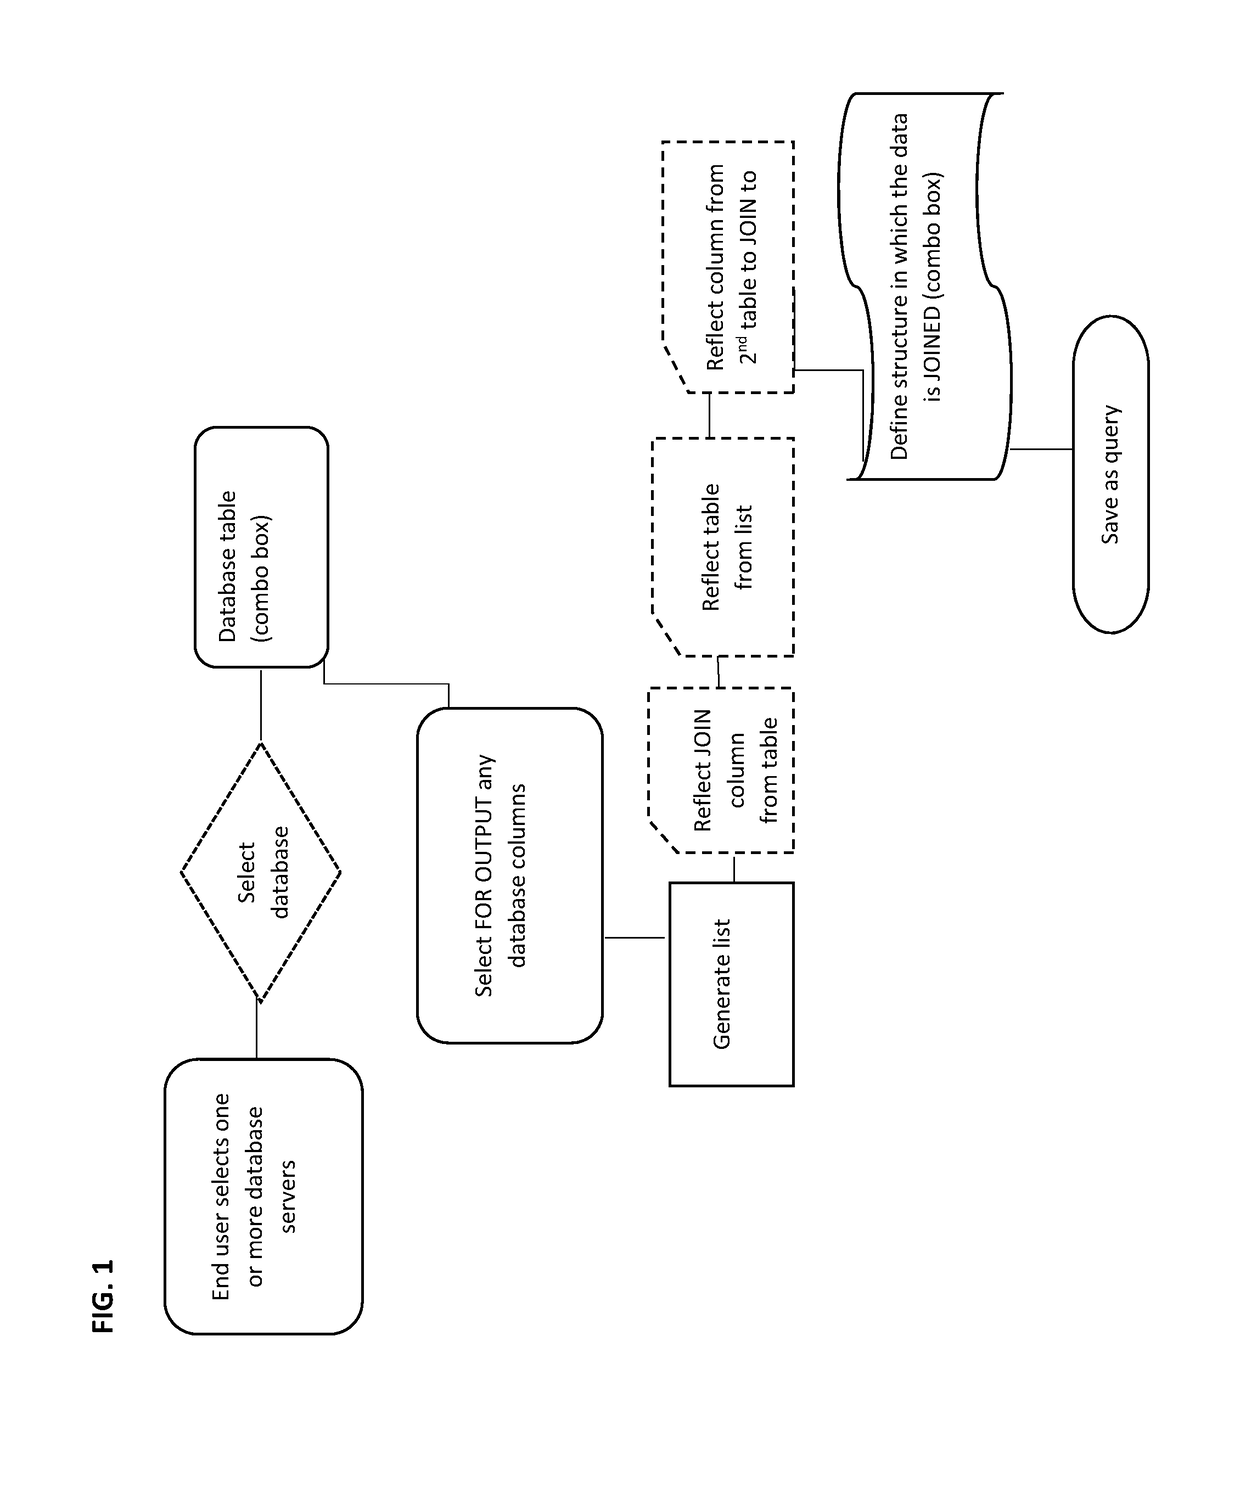 Method for database integration using a GUI to generate SQL queries